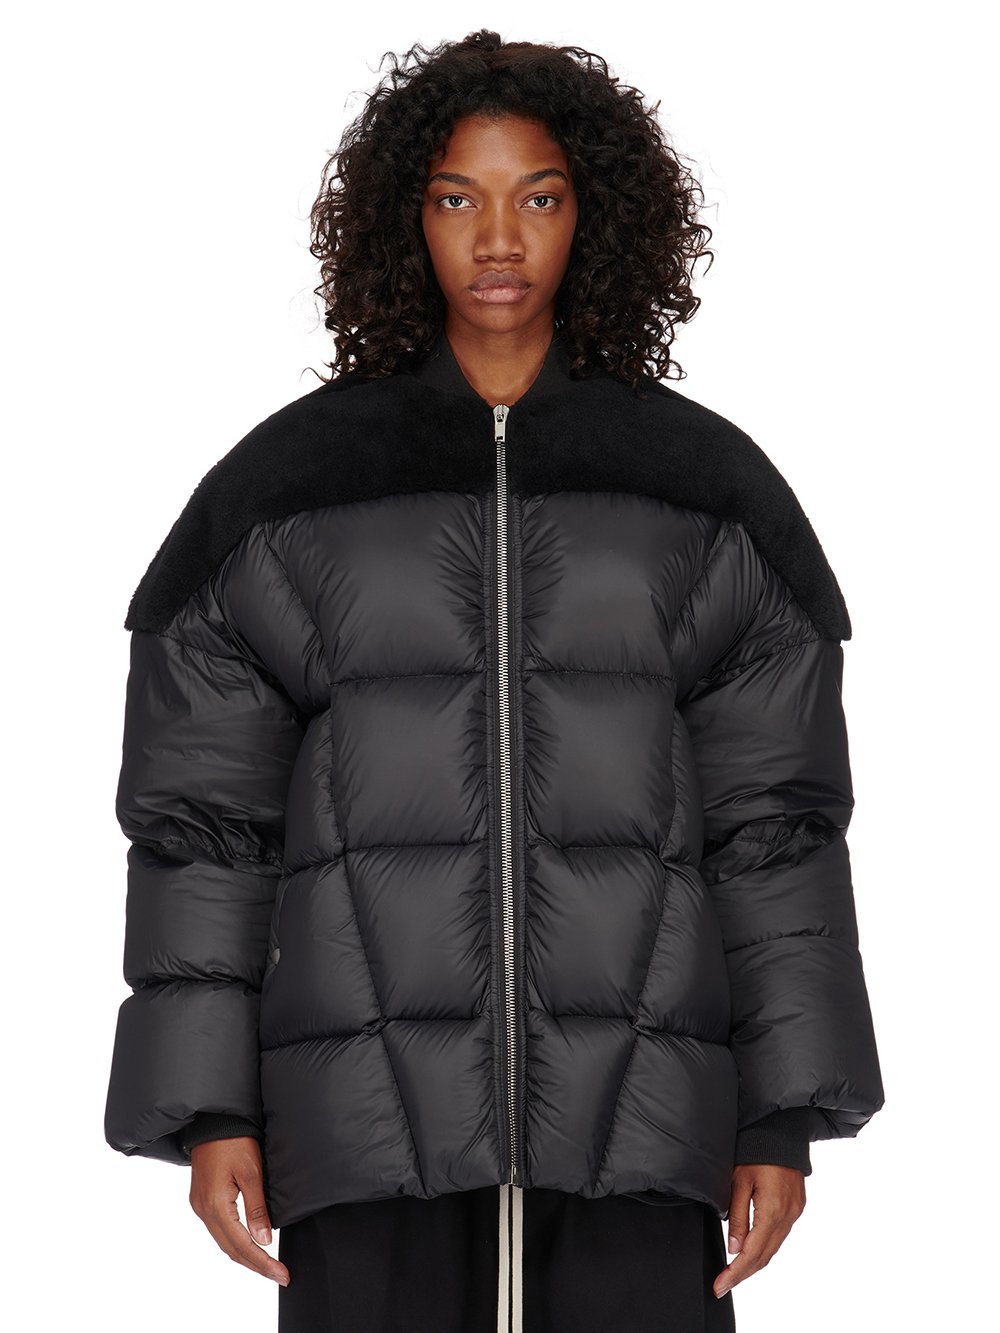 RICK OWENS FW23 LUXOR FLIGHT JKT IN  BLACK BUTTER LAMB SHEARLING AND RECYCLED NYLON